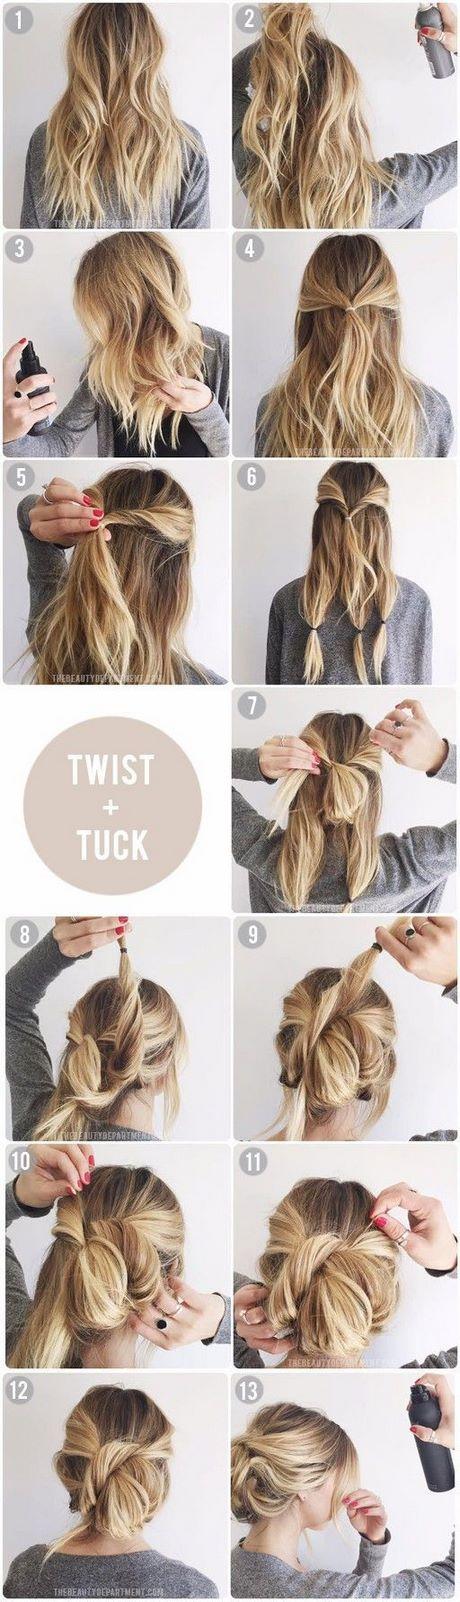 Easiest updo ever easiest-updo-ever-37